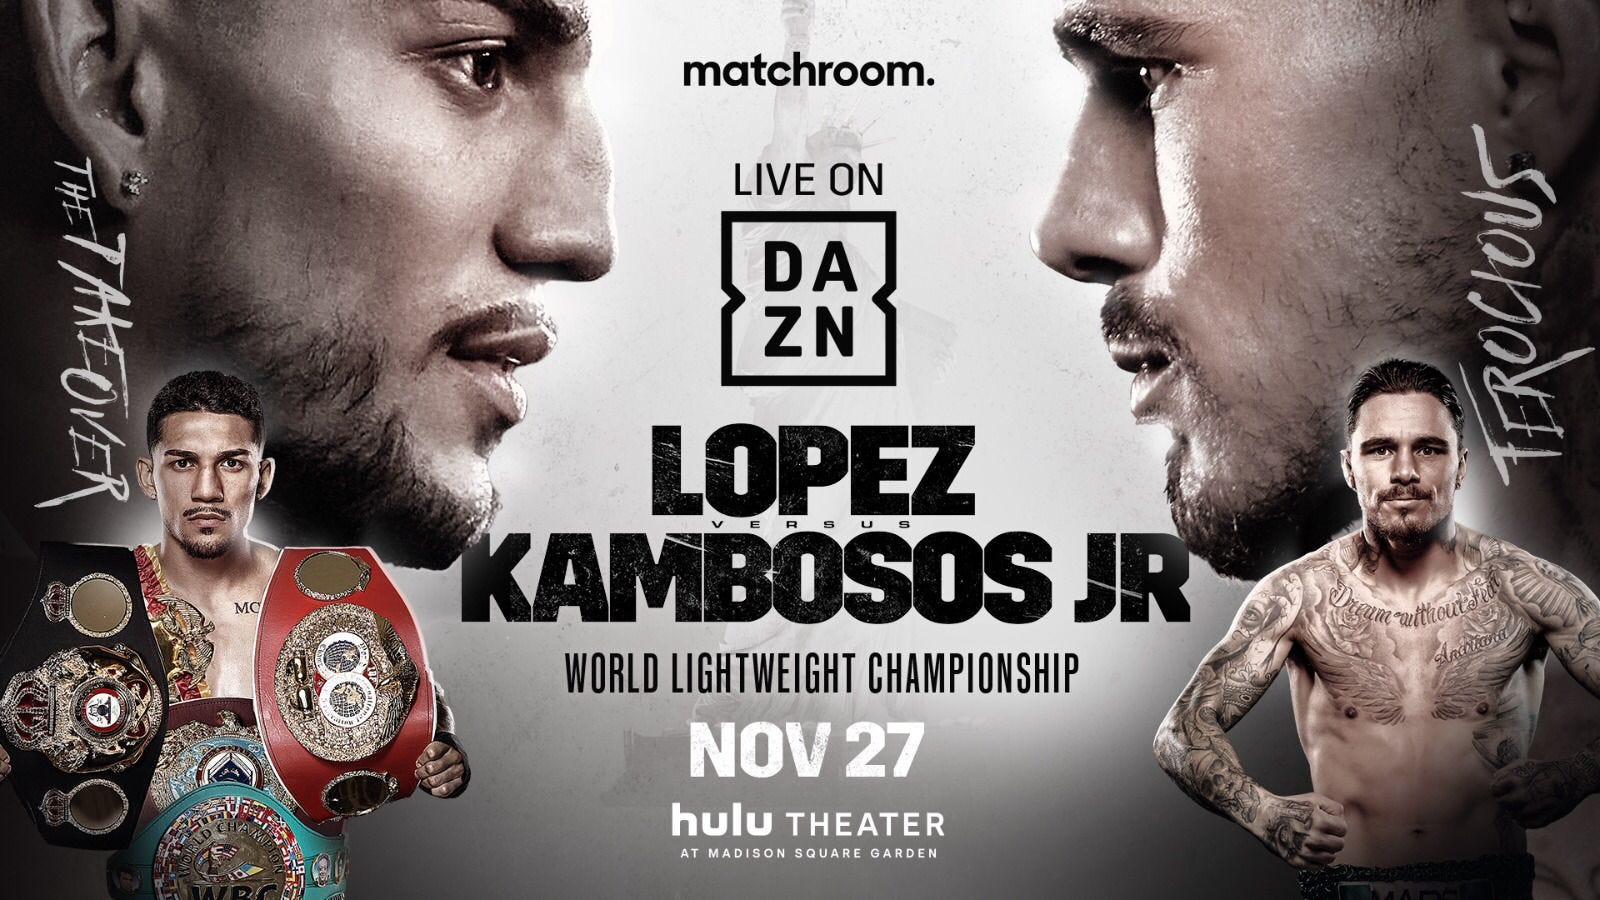 Notebook Lopez-Kambosos rescheduled yet again, this time with Matchroom in charge